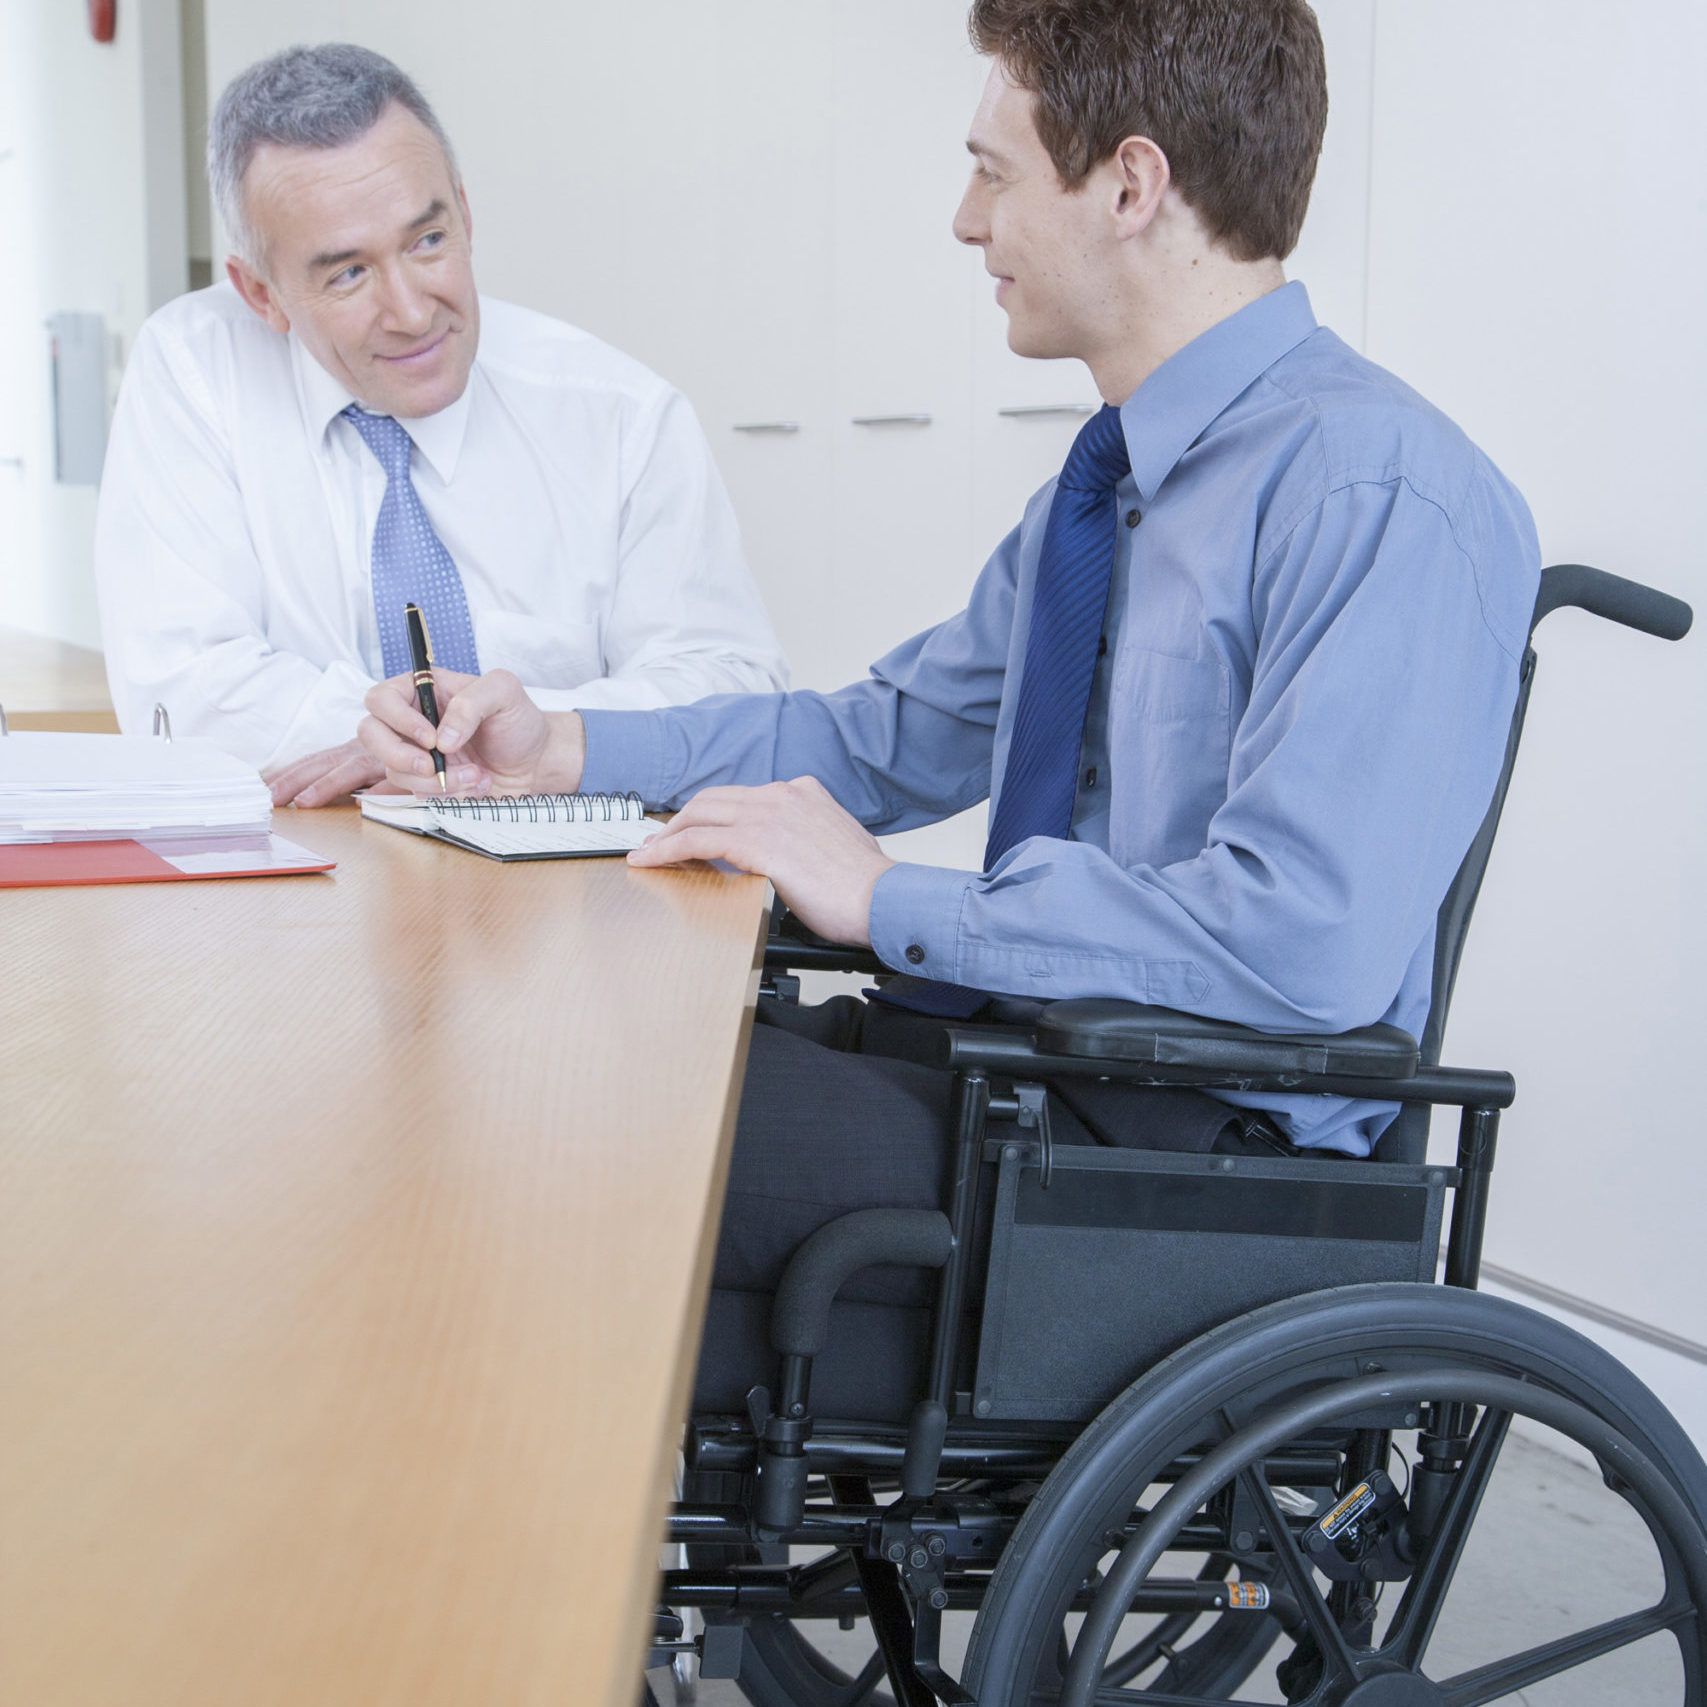 Handicapped man in wheelchair in office